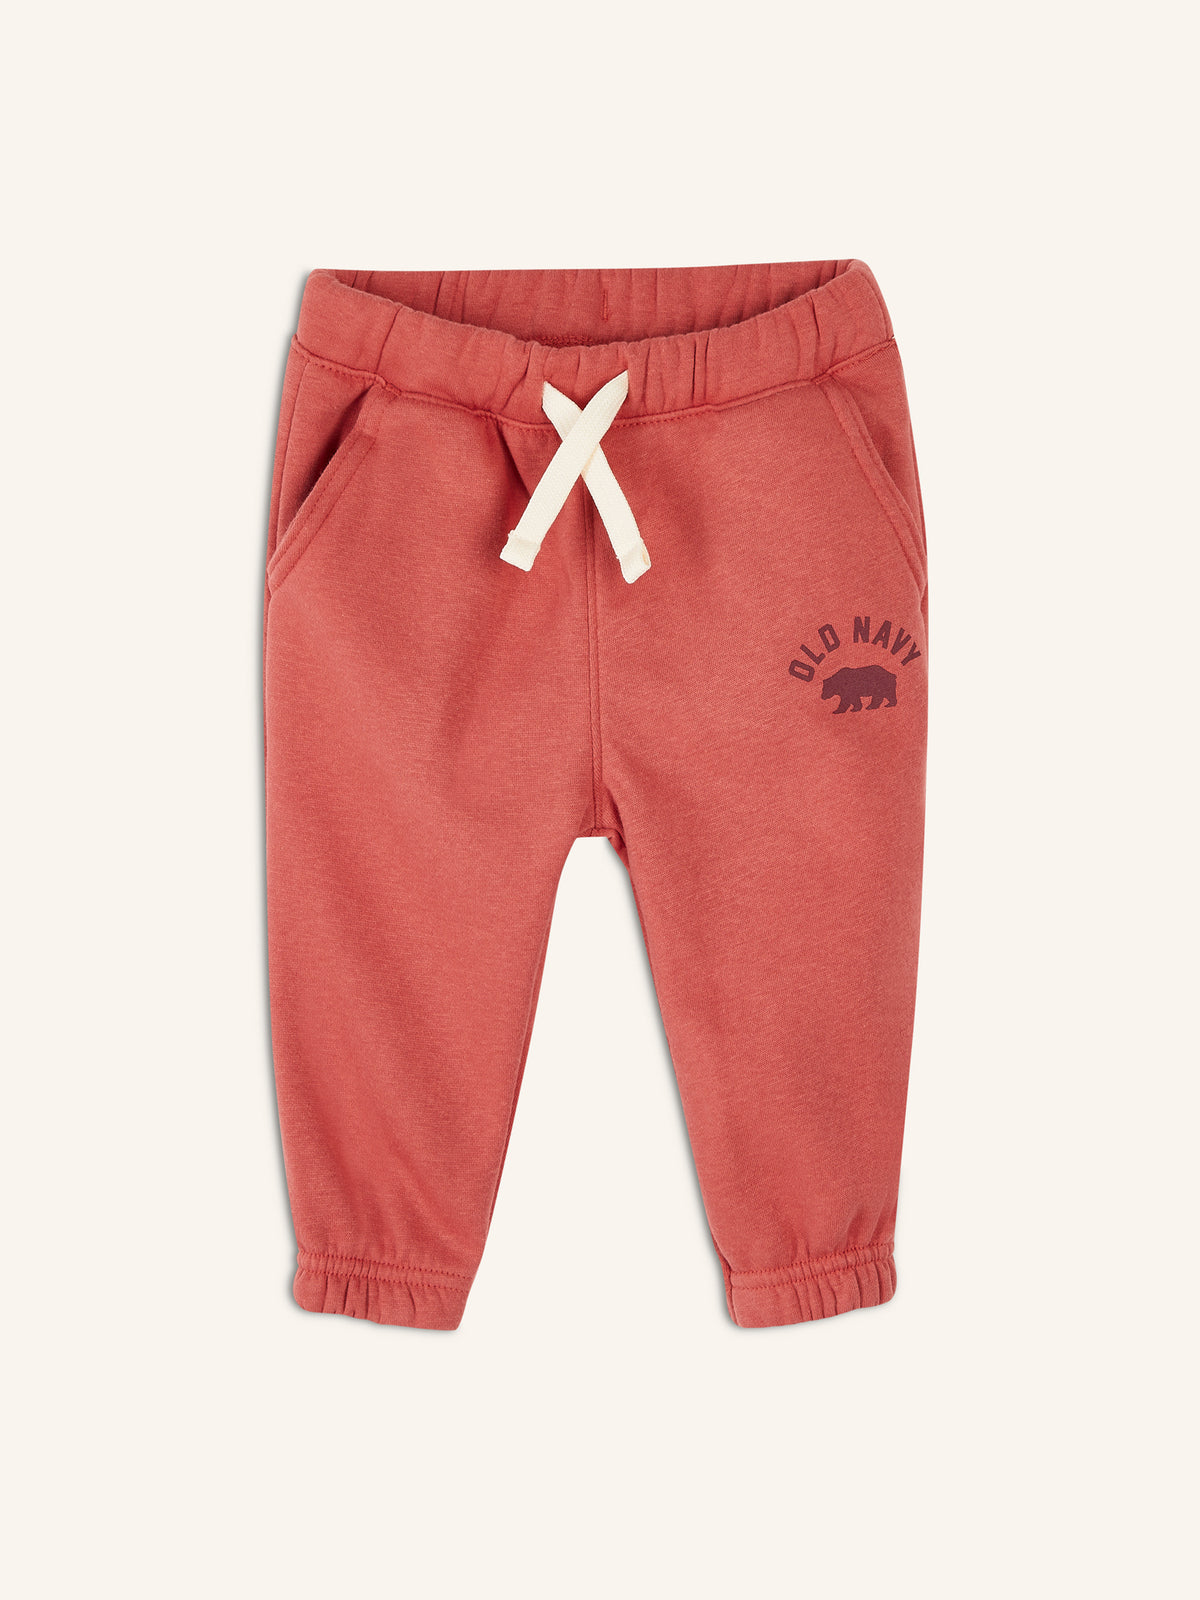 Unisex Functional-Drawstring Logo Sweatpants for Toddler - Old Navy  Philippines